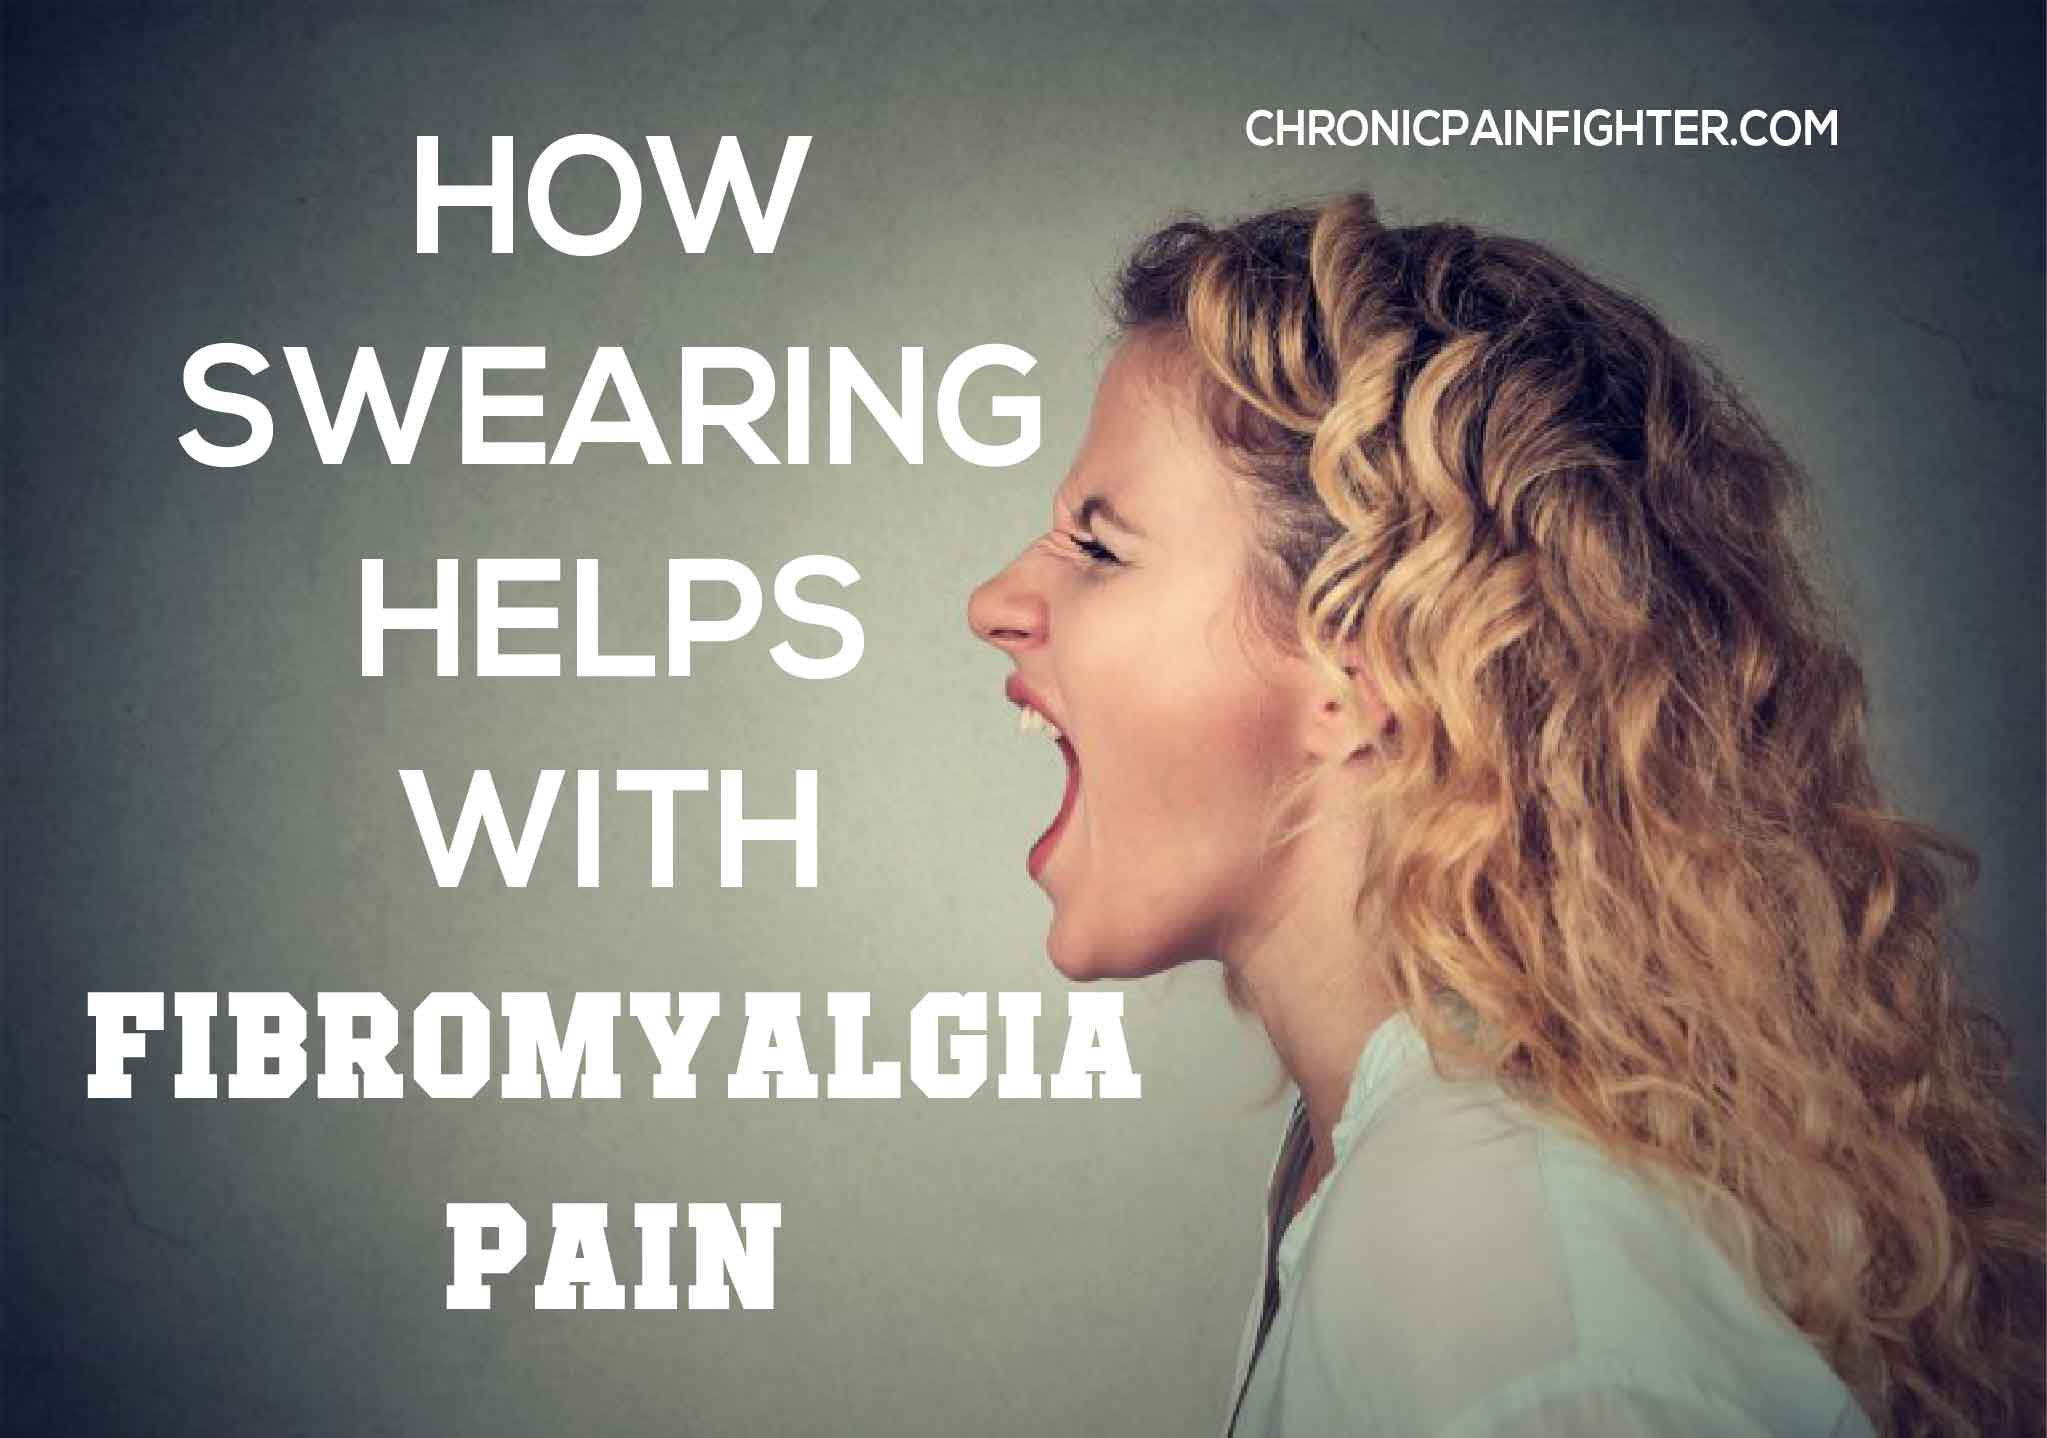 How Swearing Helps with Fibromyalgia Pain